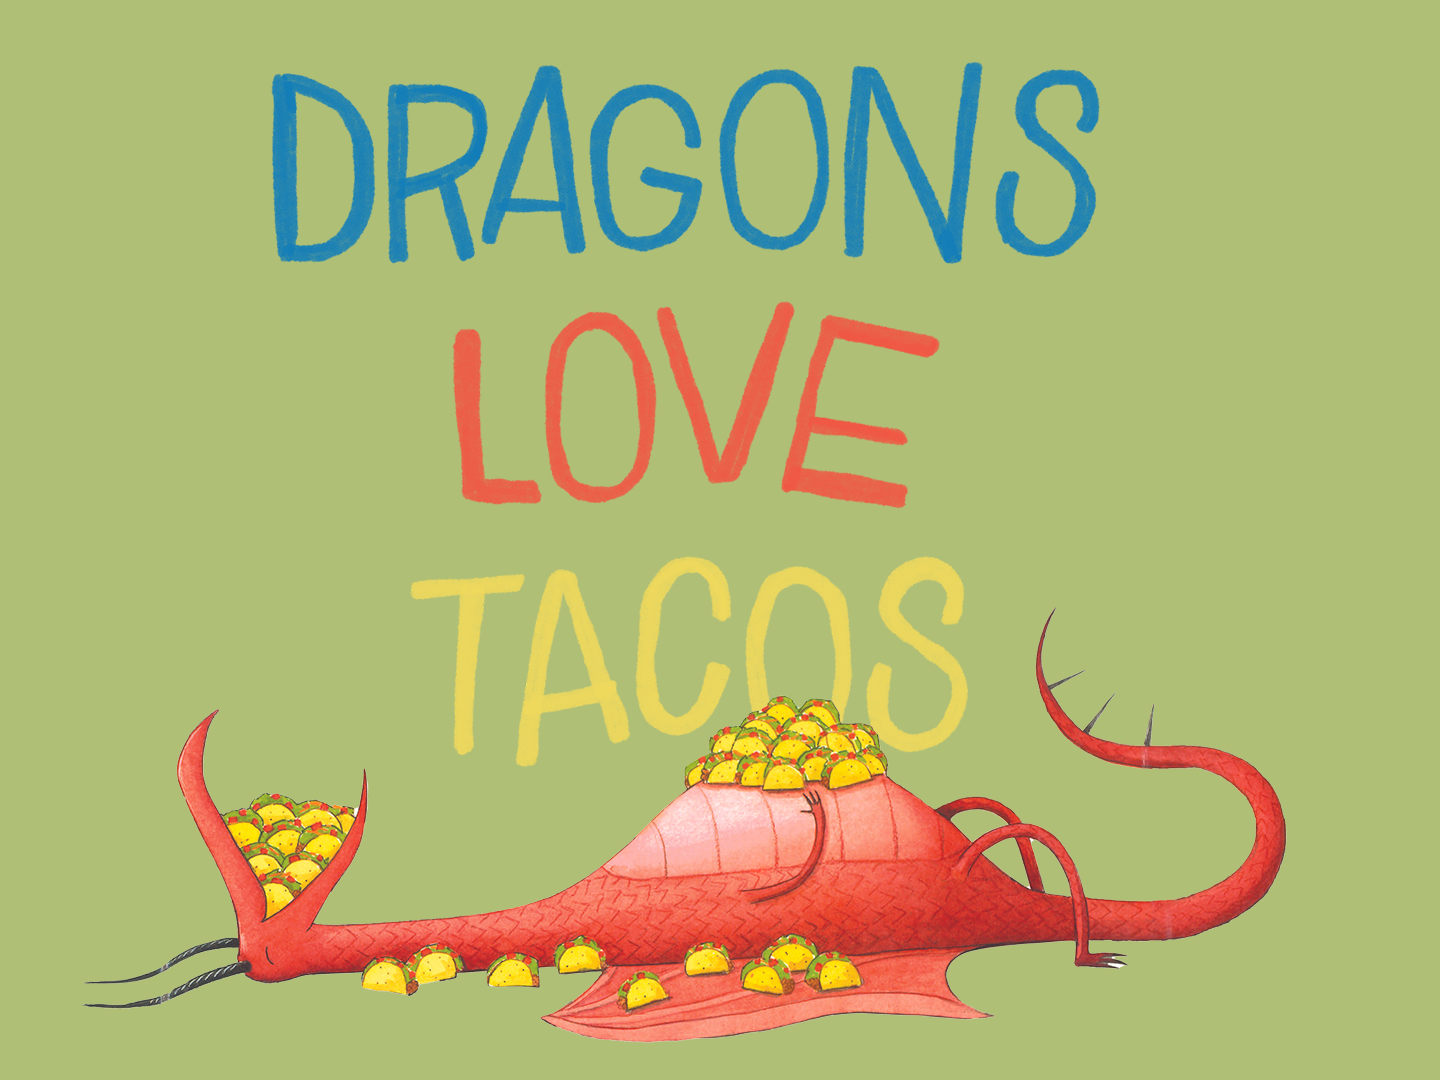 Graphic of the Dragons Love Tacos play title with an illustration of a red dragon with a mouth full of tacos.